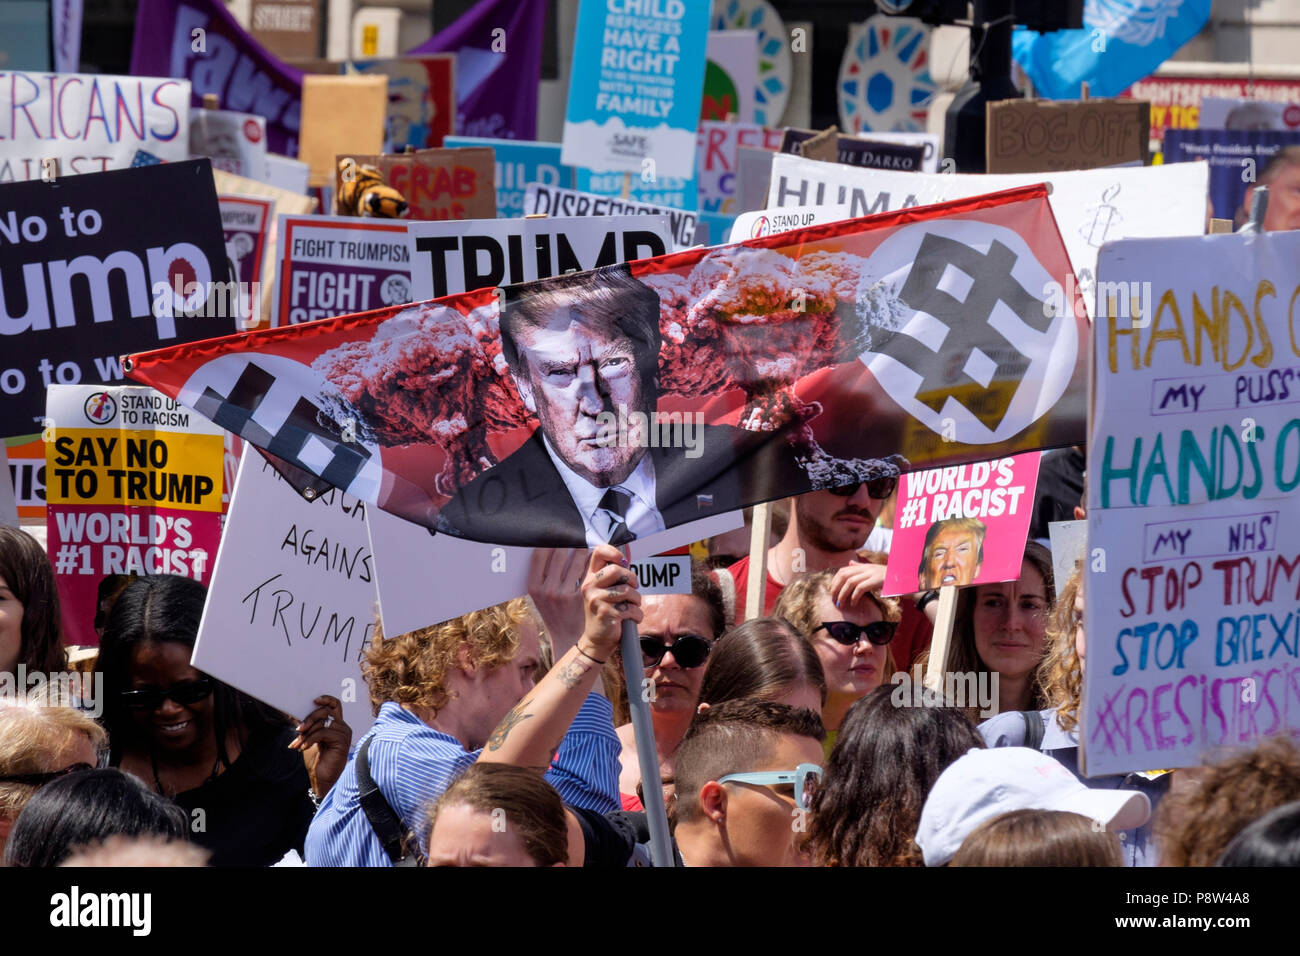 London, UK. 13th July 2018. Tens of thousands of people took to the streets of central London to protest against US President Donald Trump's visit to the UK. Stock Photo